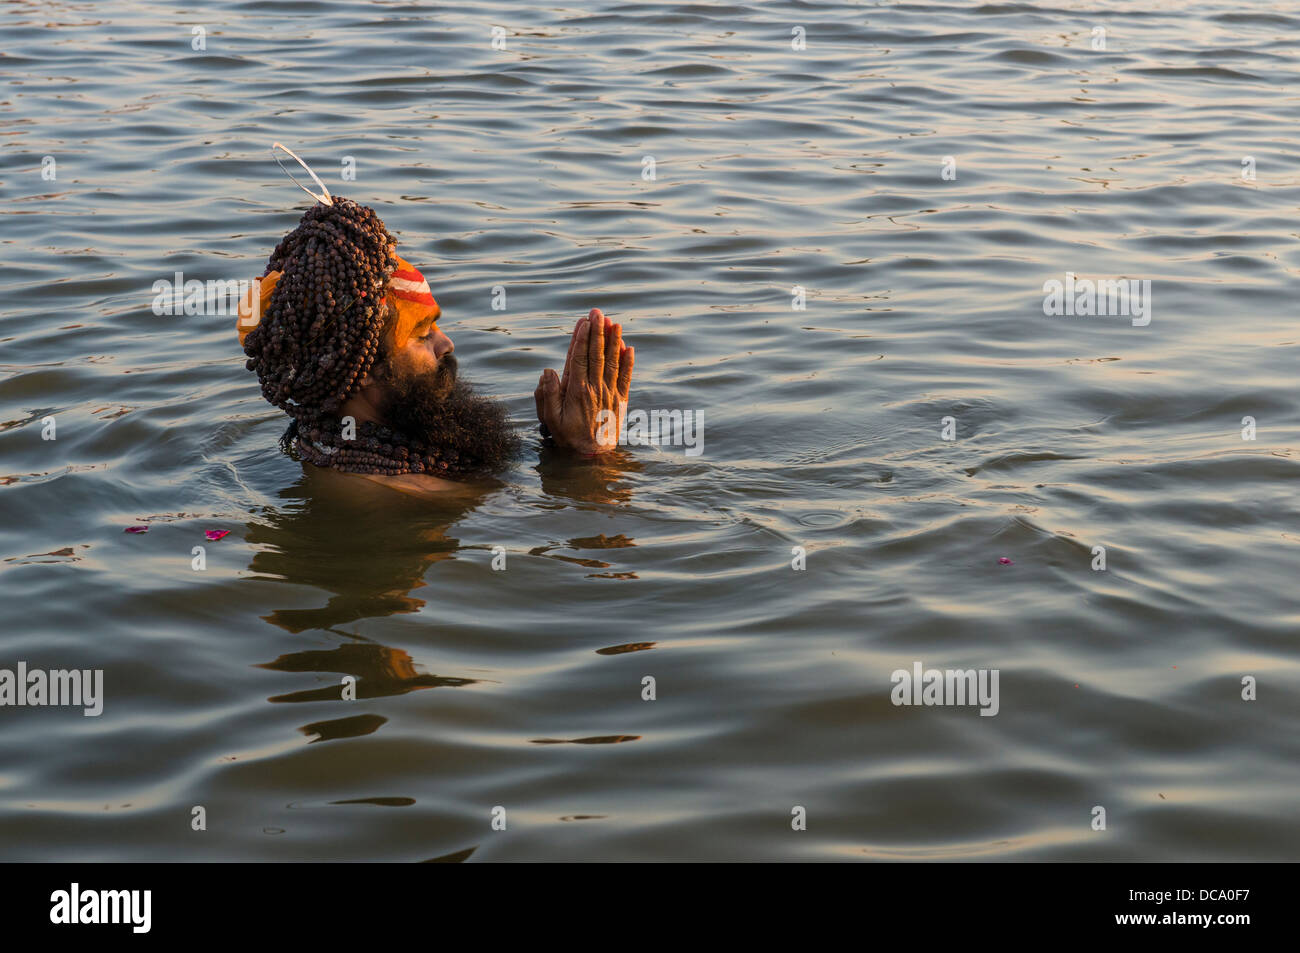 Sadhu, holy man, taking a bath and praying in the Sangam, the confluence of the rivers Ganges, Yamuna and Saraswati, just before Stock Photo